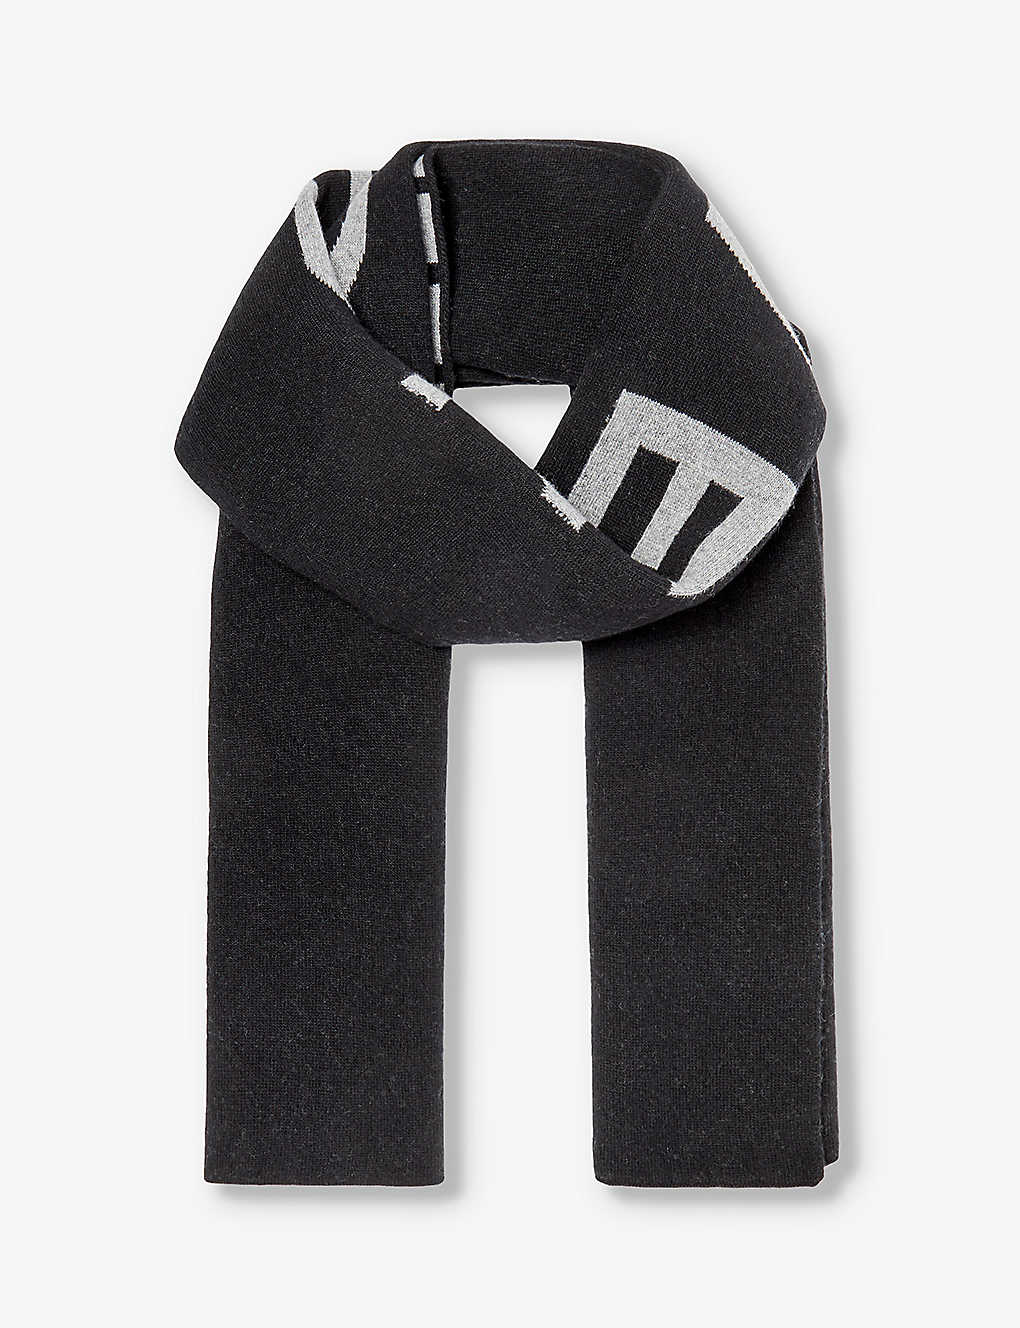 Givenchy 4g Brand-logo Wool And Cashmere Scarf In Black/grey